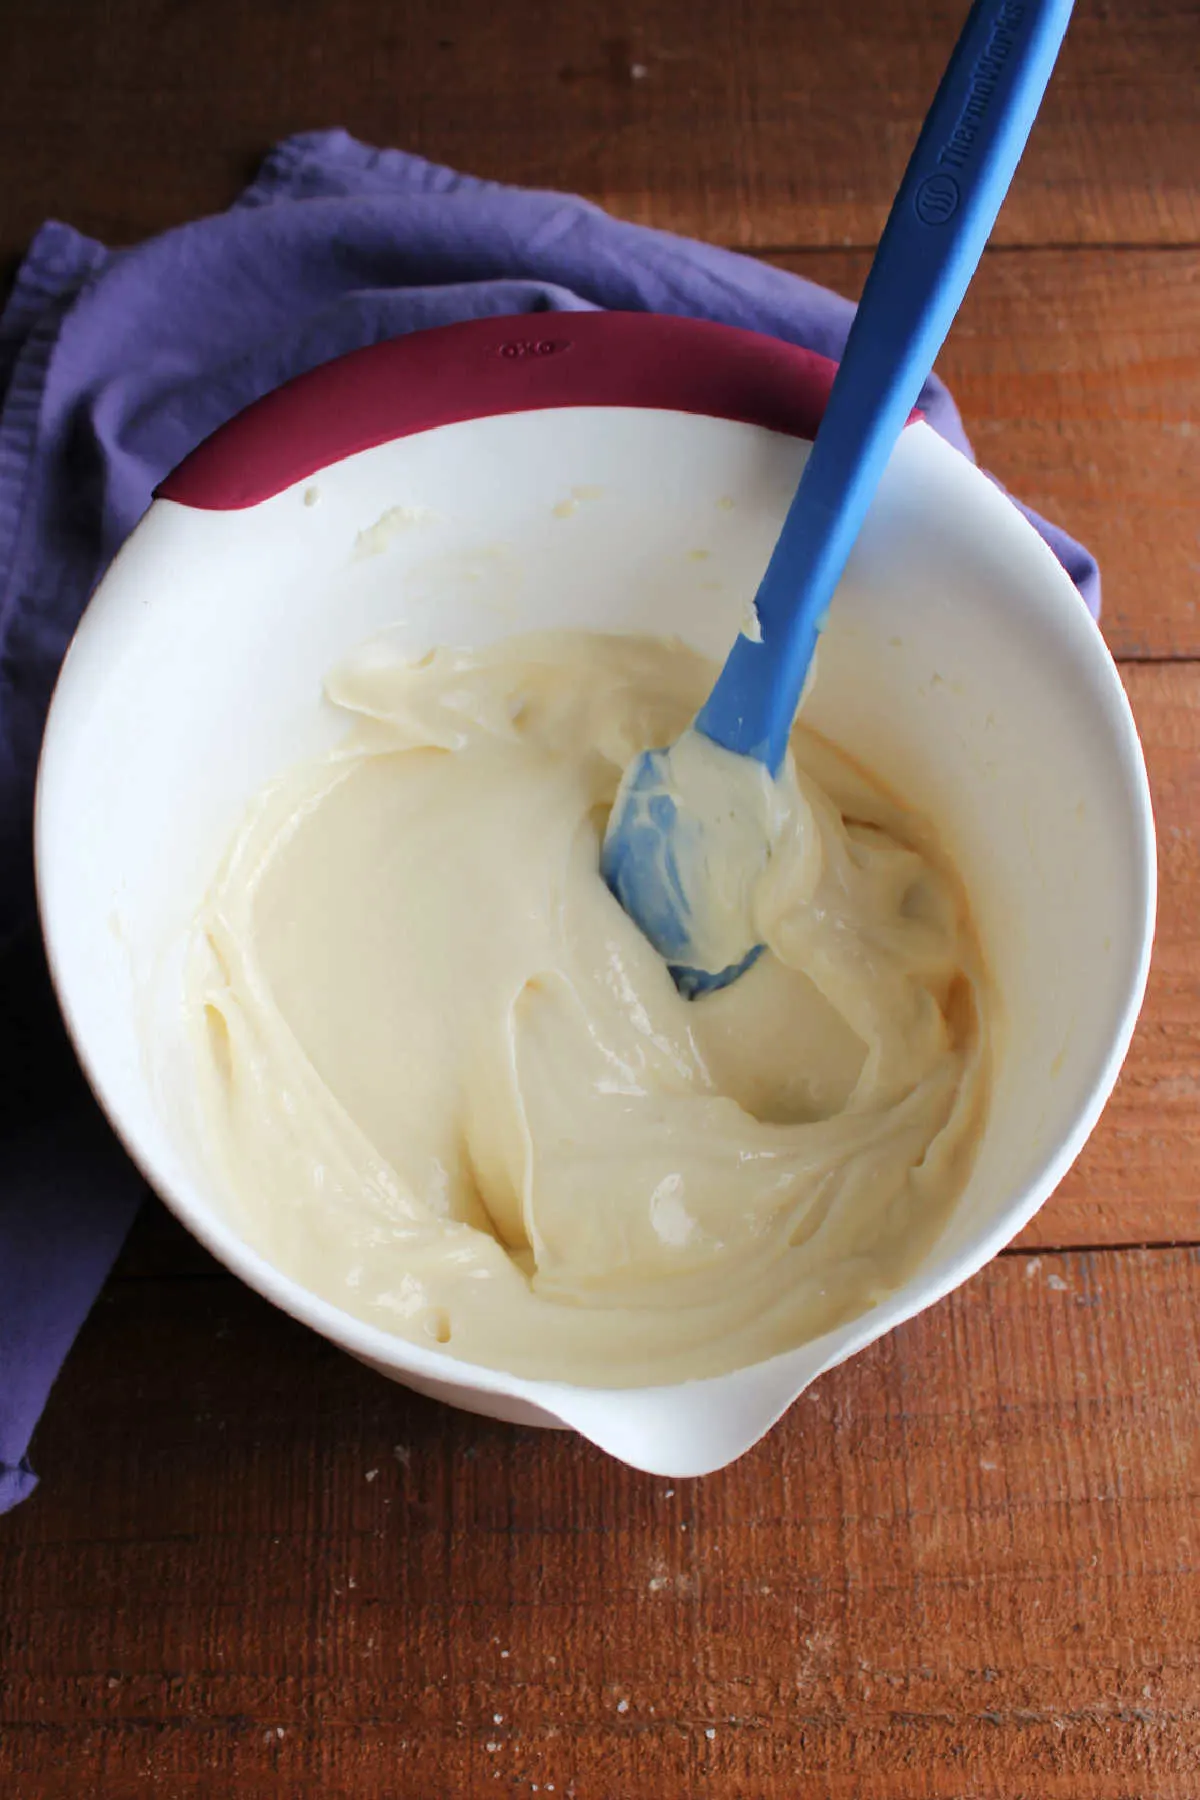 Mixing bowl of chilled lemon cream cheese frosting showing how it is thicker and now holds its ridges when a spatula is run over it.